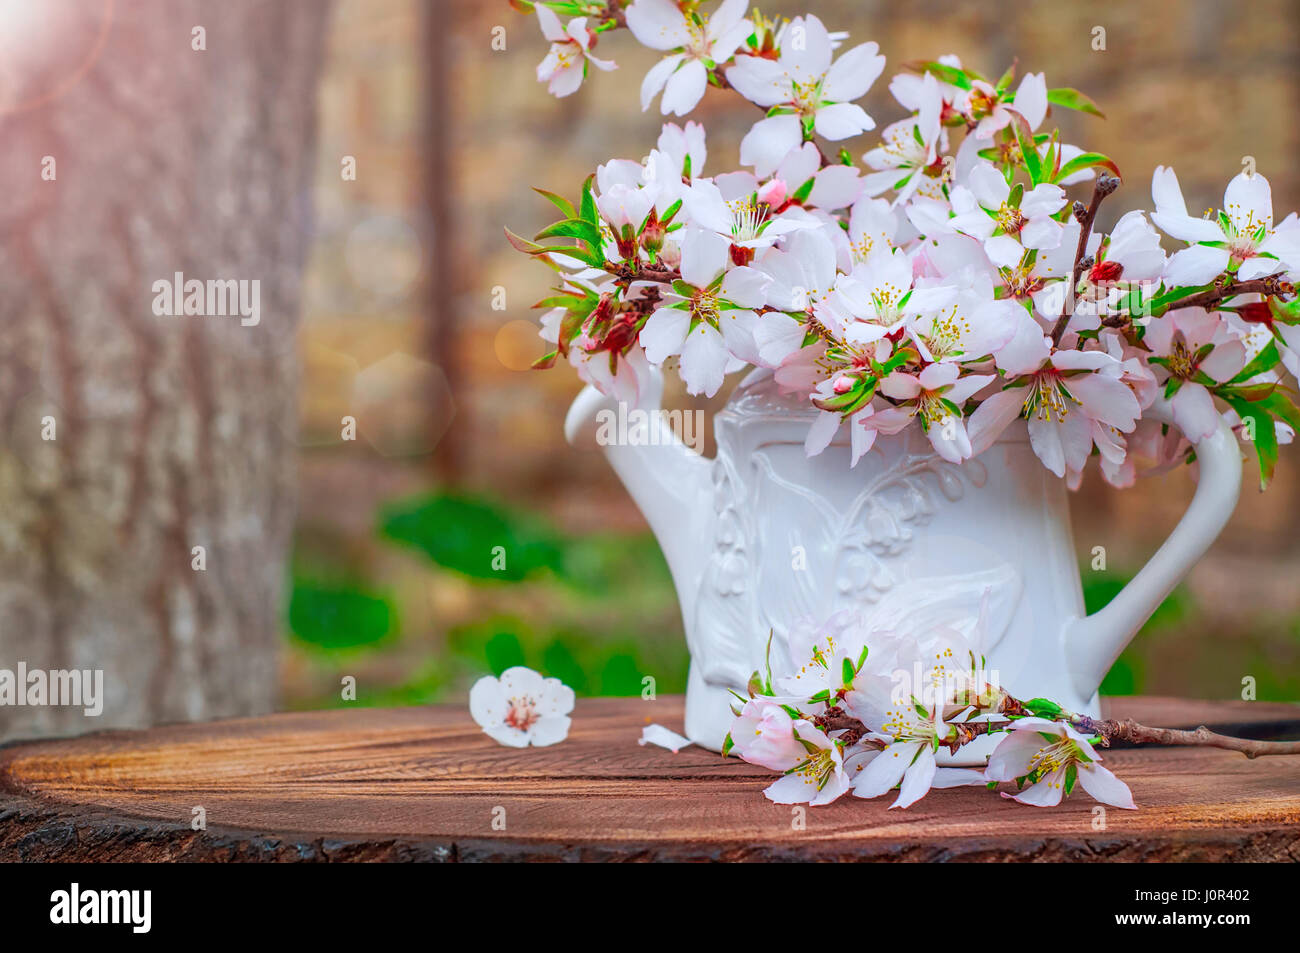 White vase with a bouquet of branches of flowering almonds, close up Stock Photo